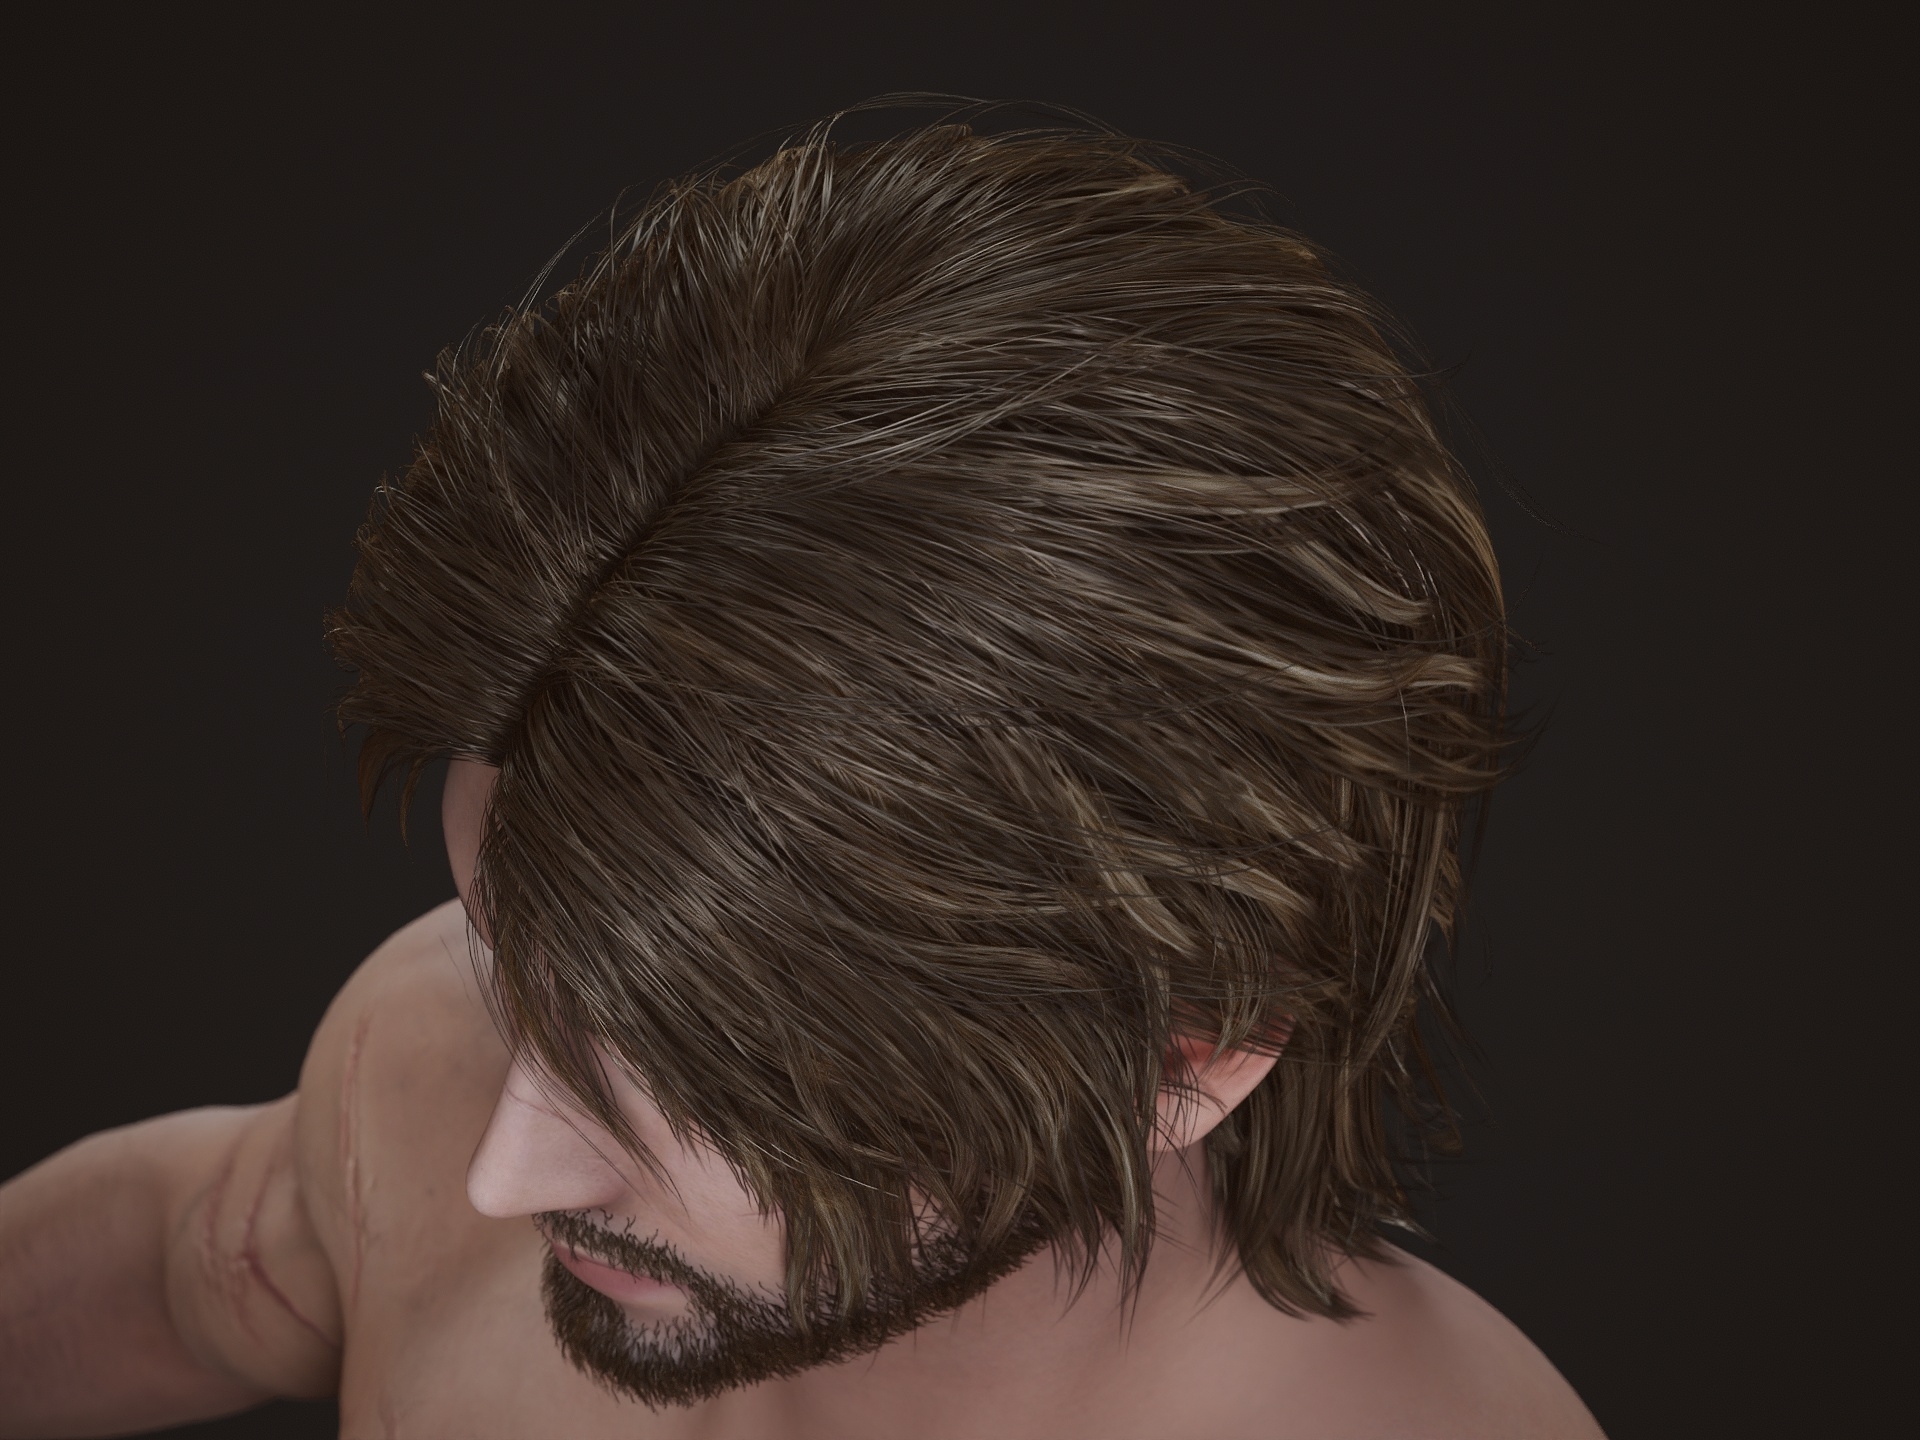 More texture progress and hair work on this Greek guy  Male Warrior Scars Man 5